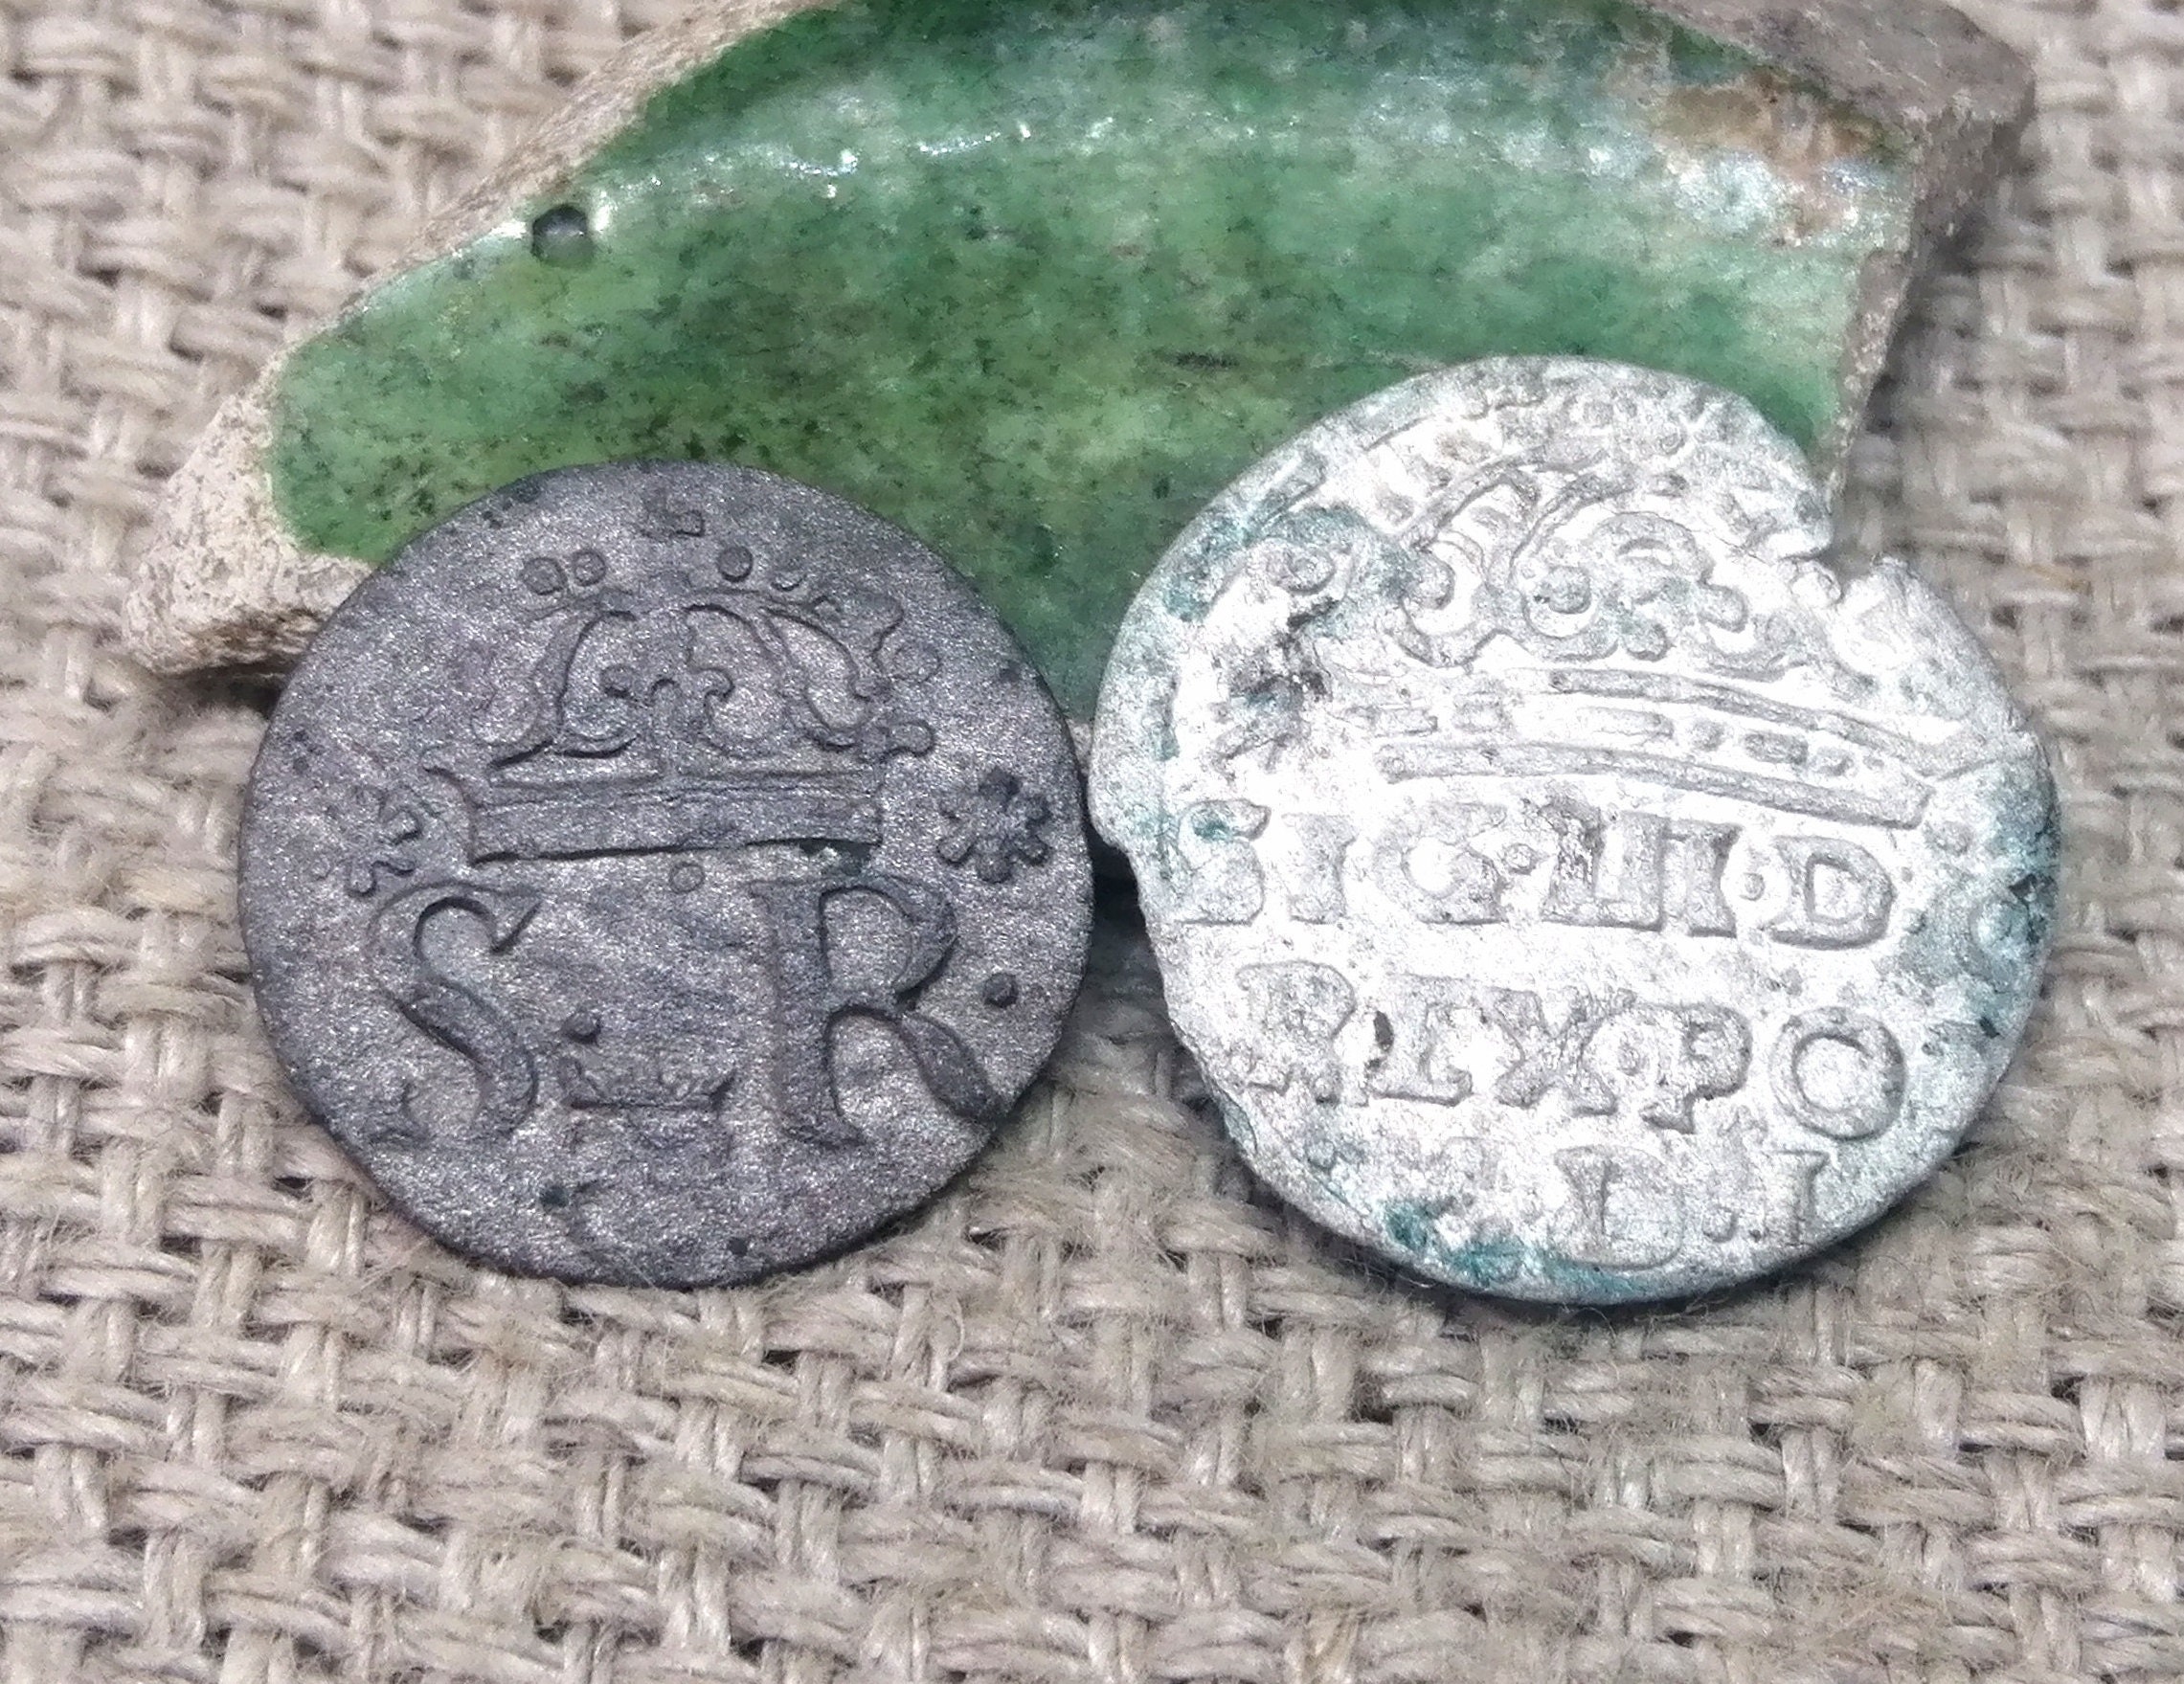 Medieval 2 Silver Polish-Lithuanian Coins Authentic Silver Medieval European Coins.